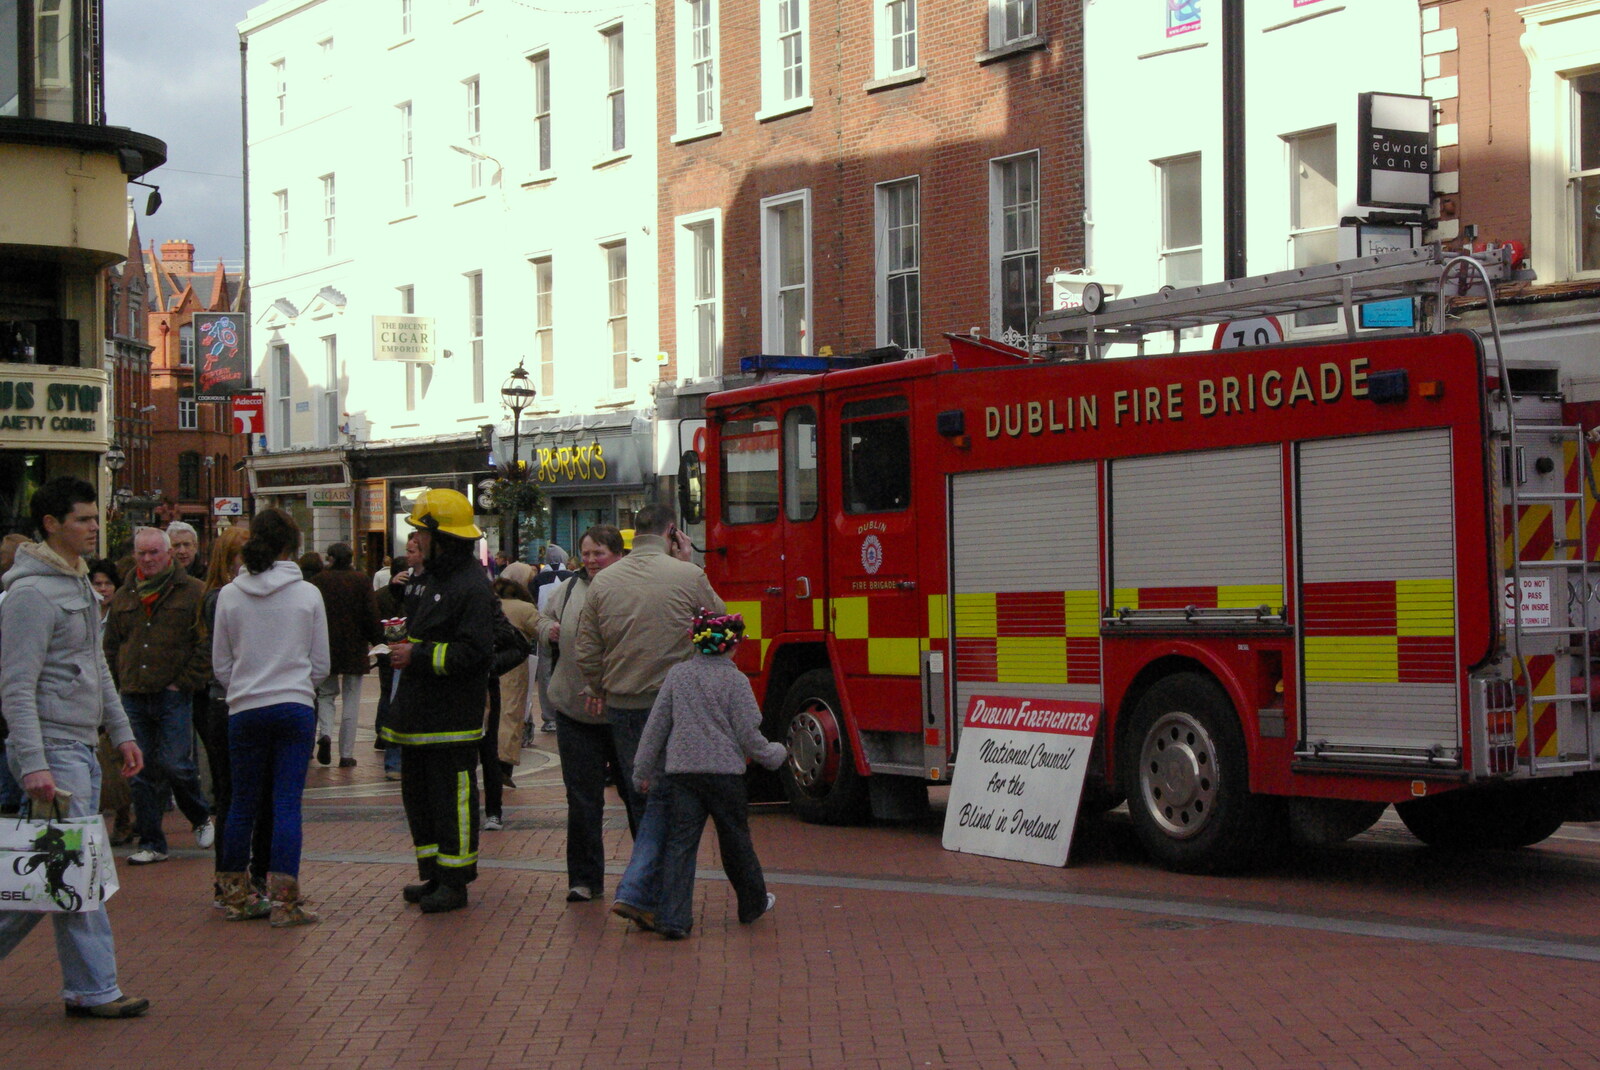 Easter in Dublin, Ireland - 21st March 2008: A fire engine does fund-raising on Grafton Street